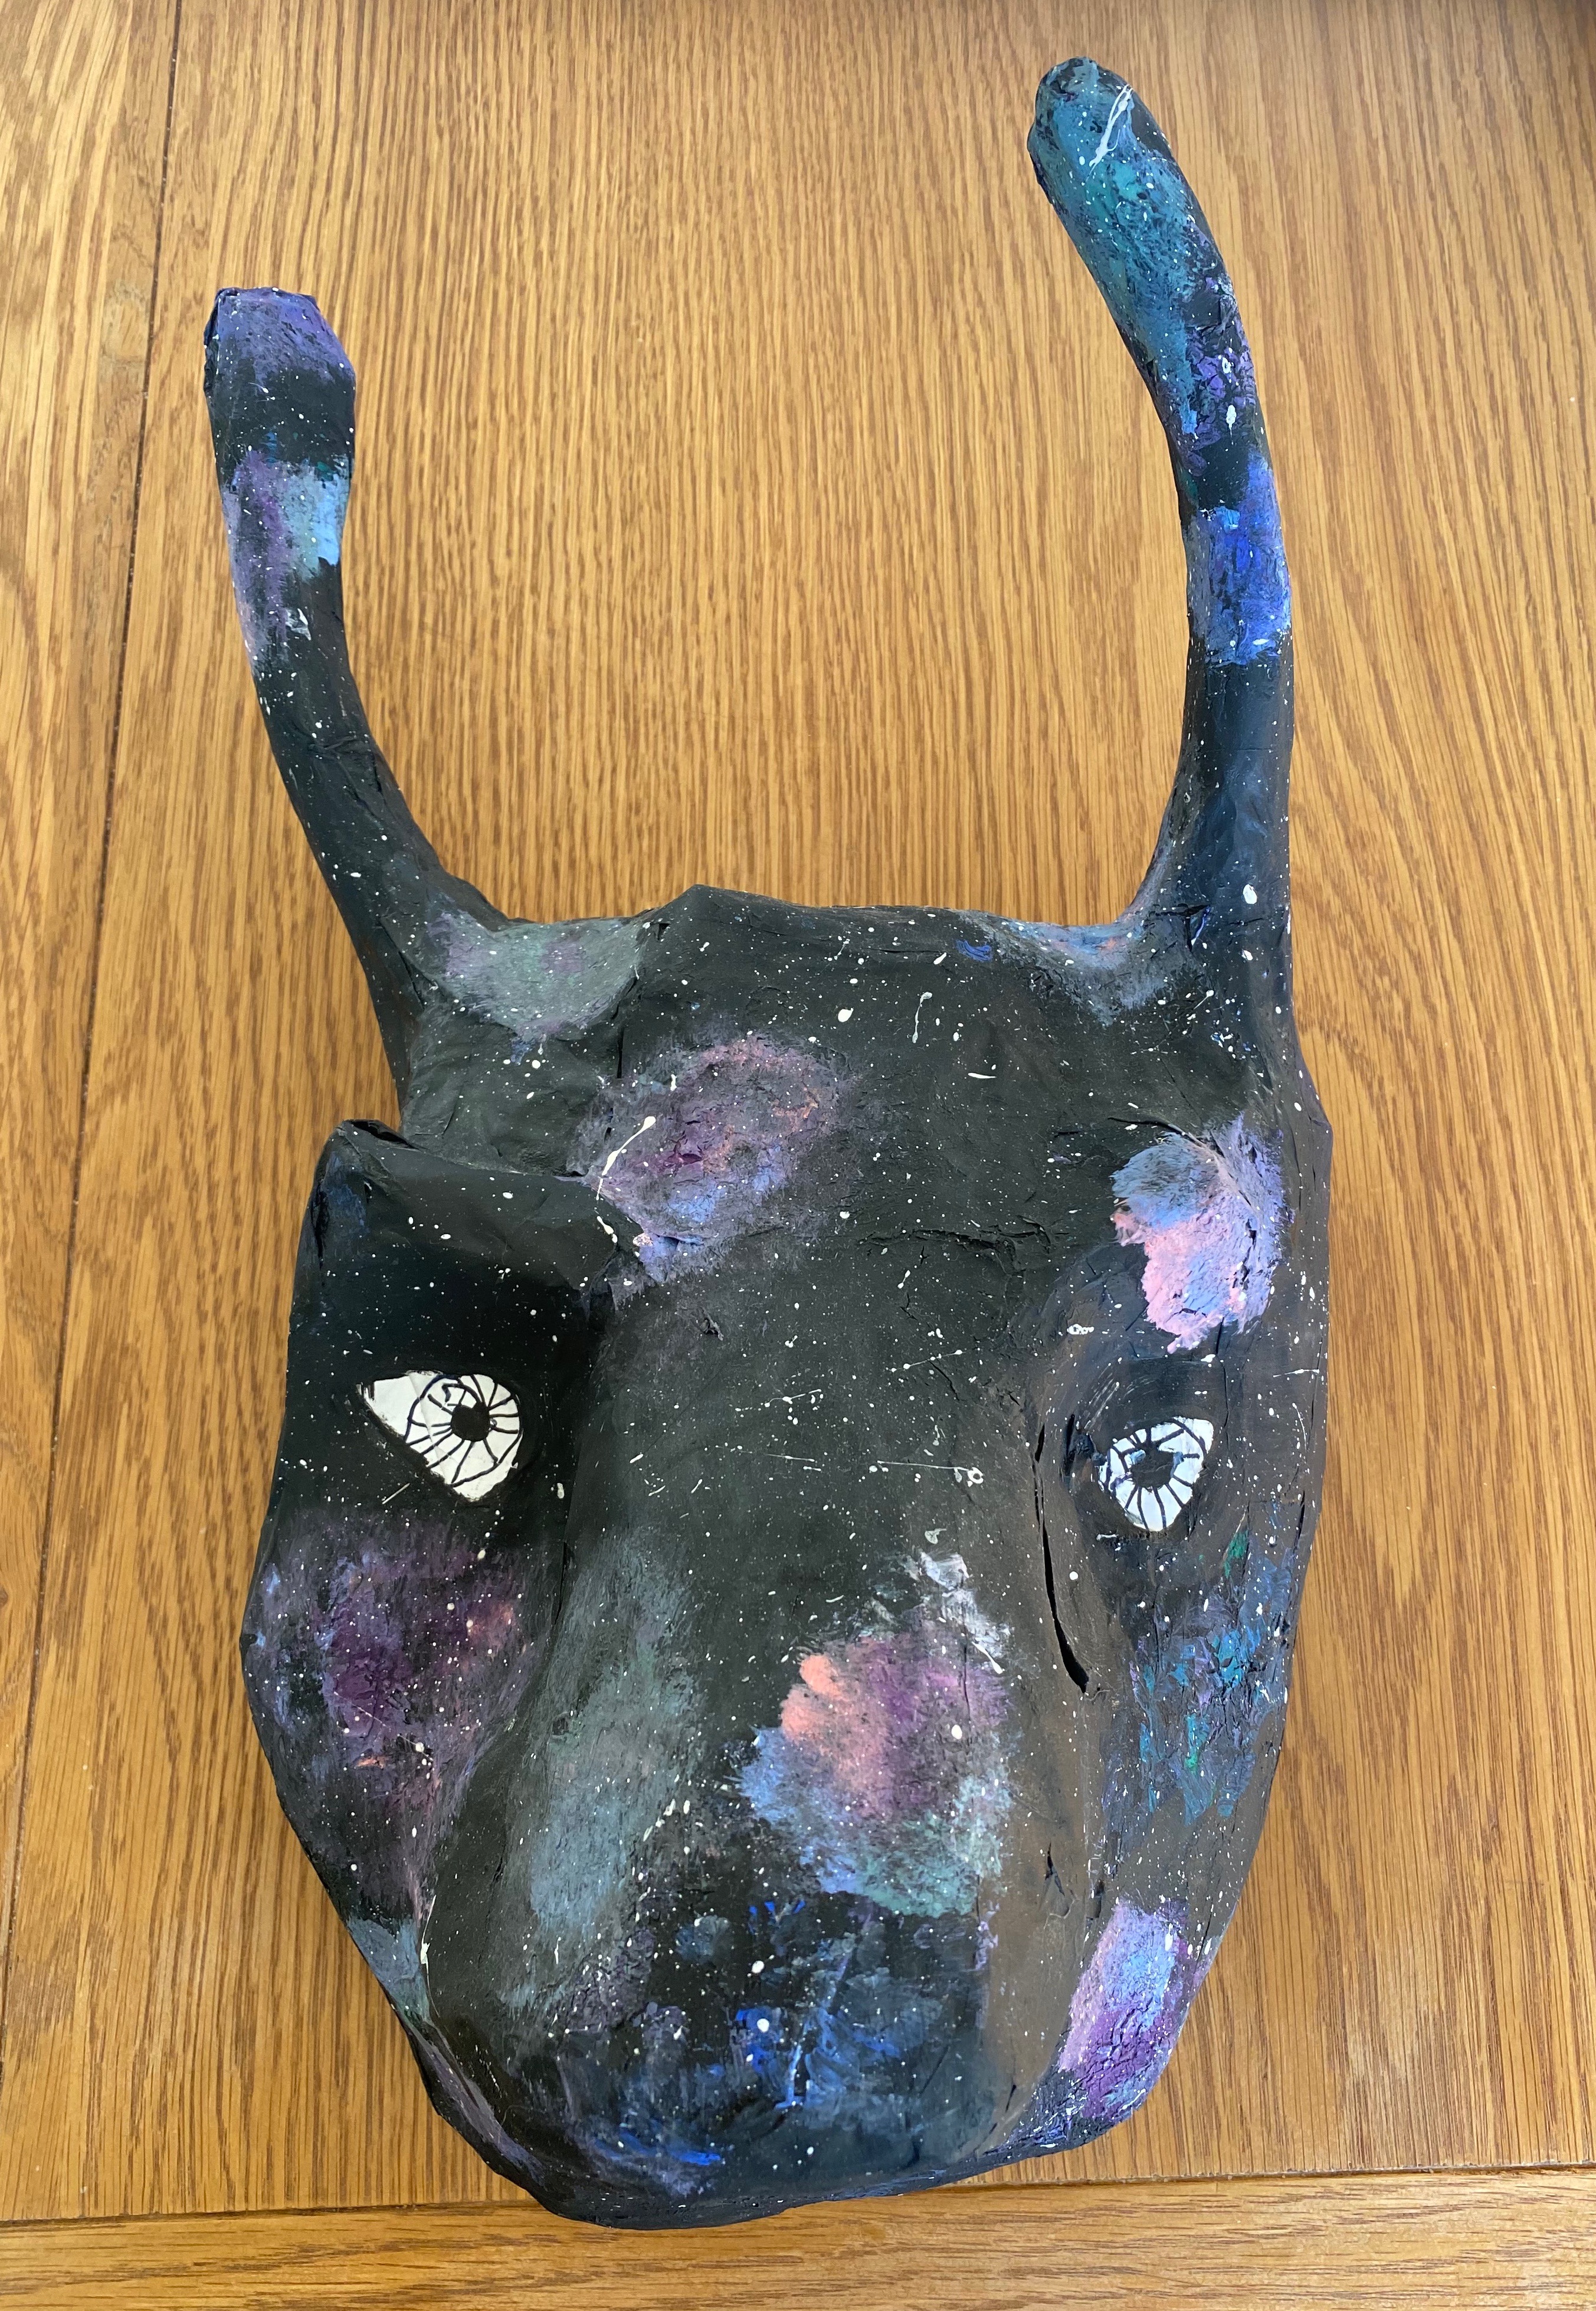 'The Bull in the Stars' by Maya (12) from Leitrim